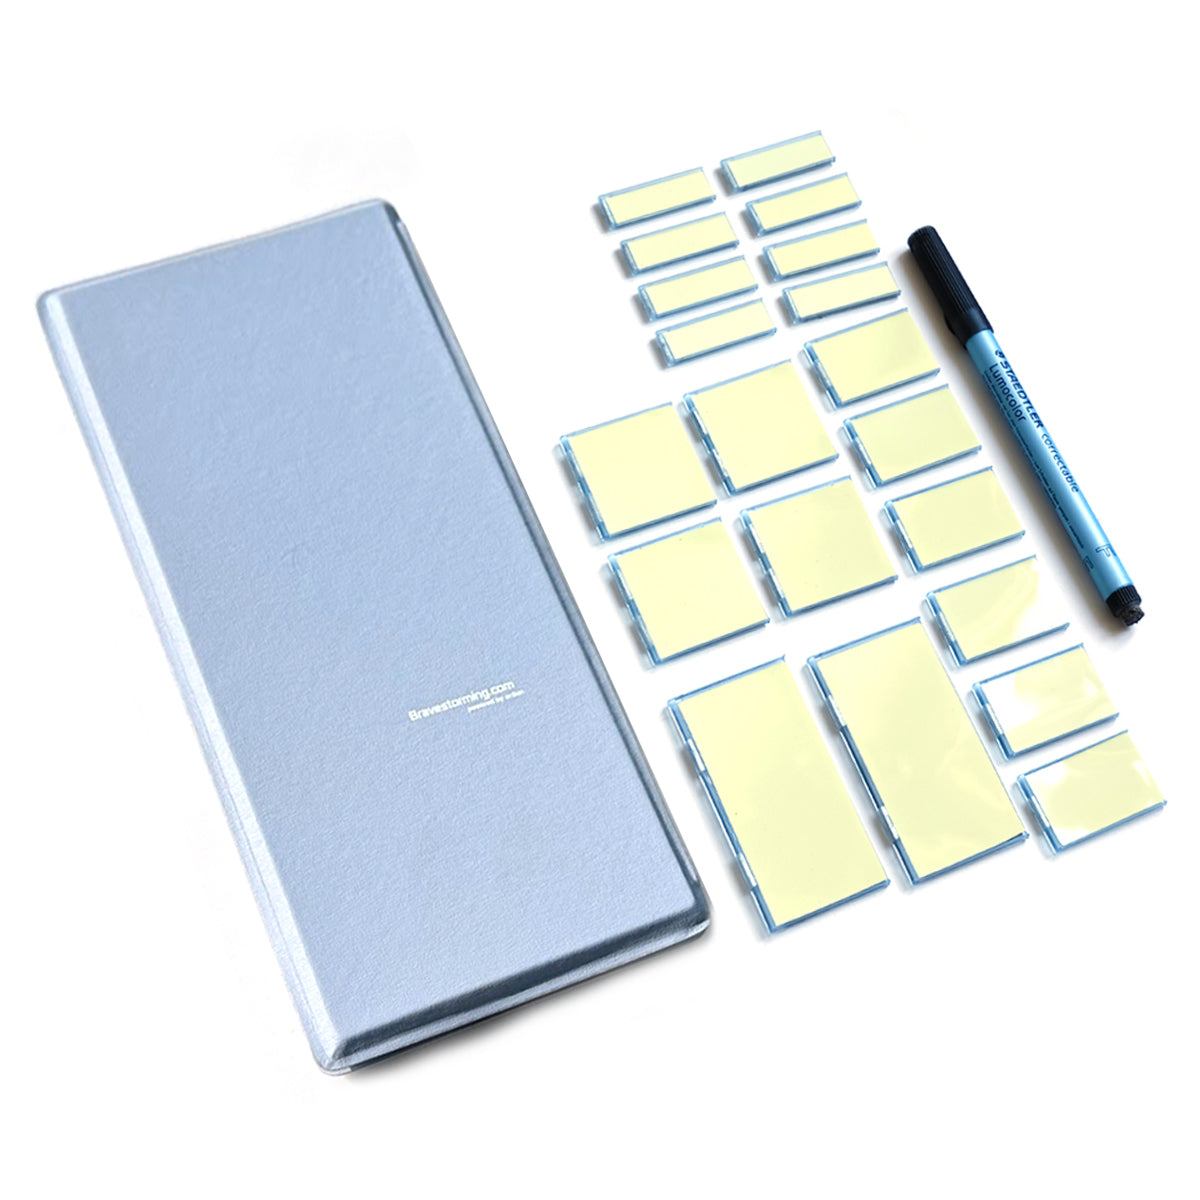 MoverPad + Mover Erase Combo Bundle